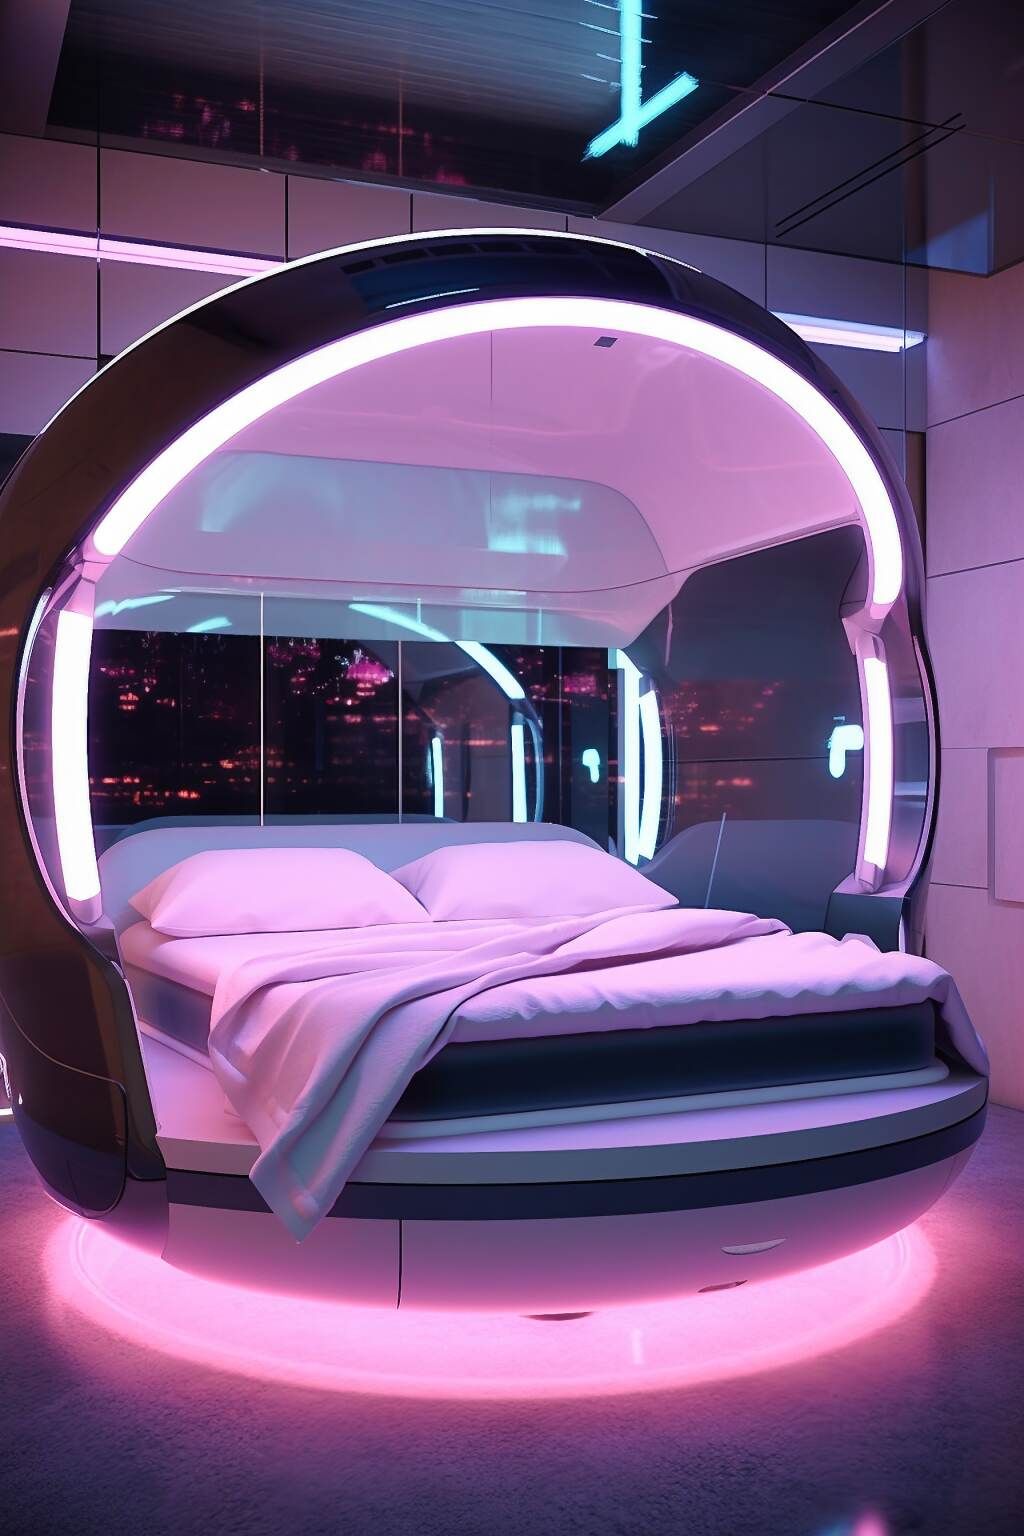 Futuristic Day Bed Revolutionary Design for Relaxation and Sleep Experience in the Future